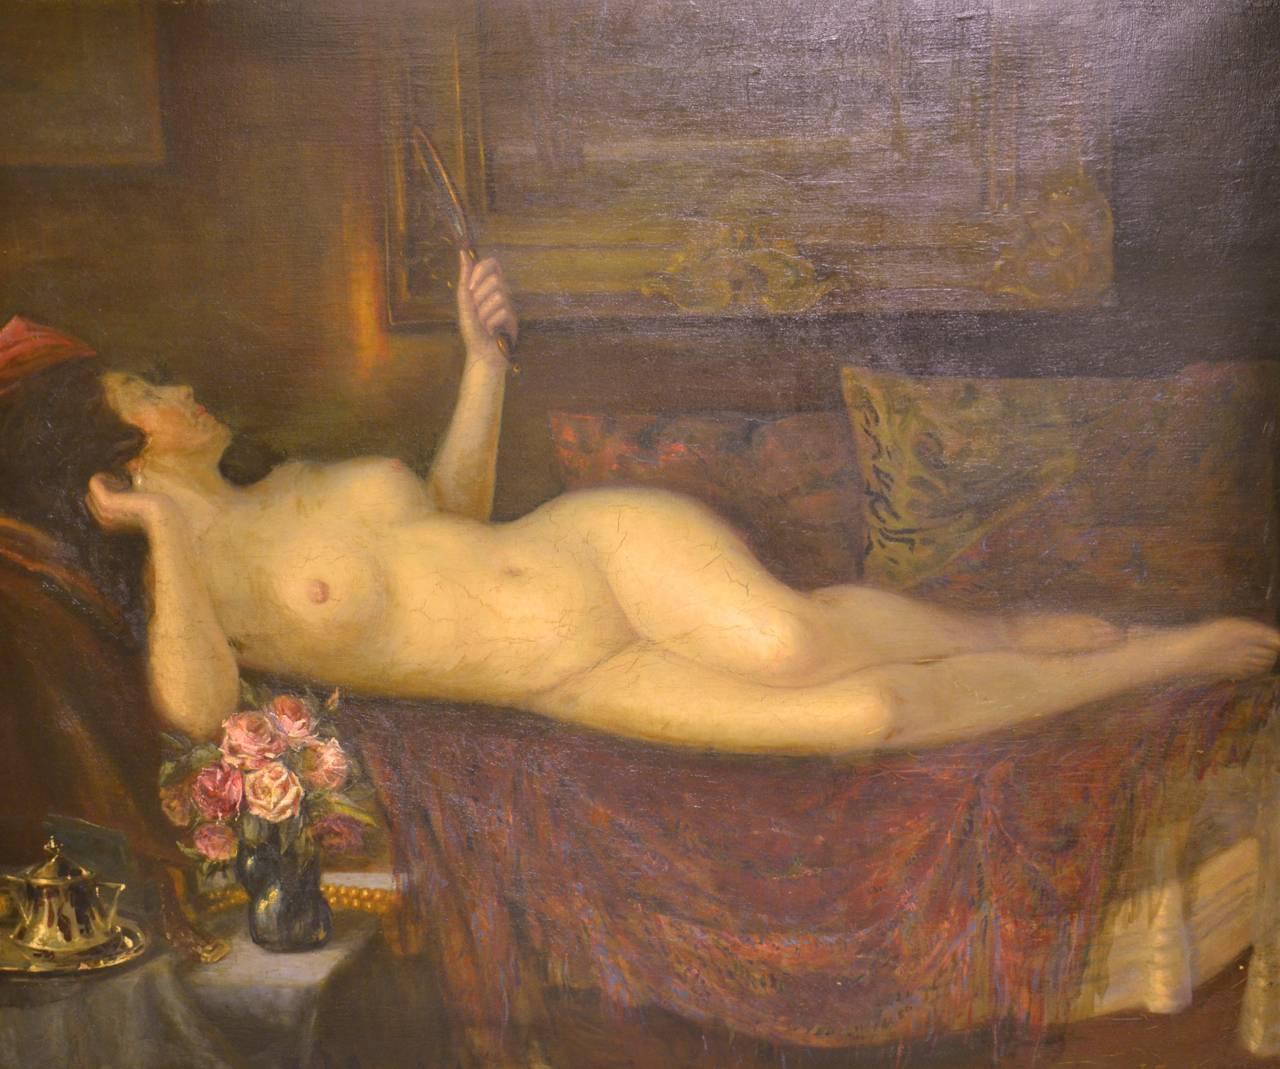 Reclining Nude Woman with Mirror and Roses - Painting by Jan Wysocki